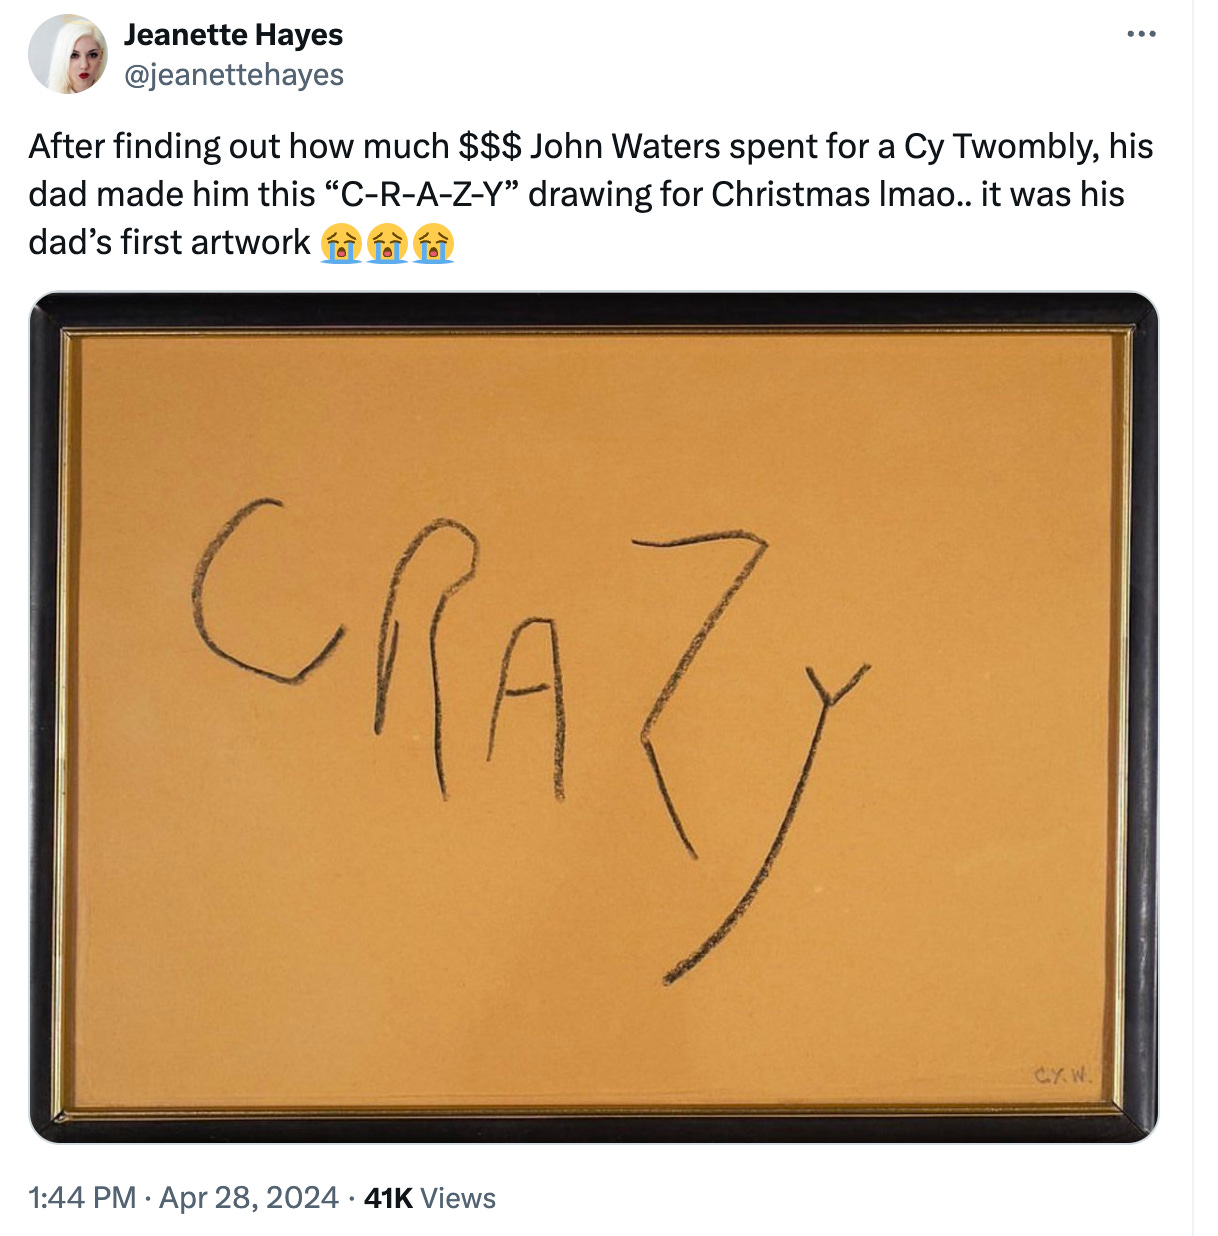 tweet that reads: After finding out how much $$$ John Waters spent for a Cy Twombly, his dad made him this “C-R-A-Z-Y” drawing for Christmas lmao.. it was his dad’s first artwor